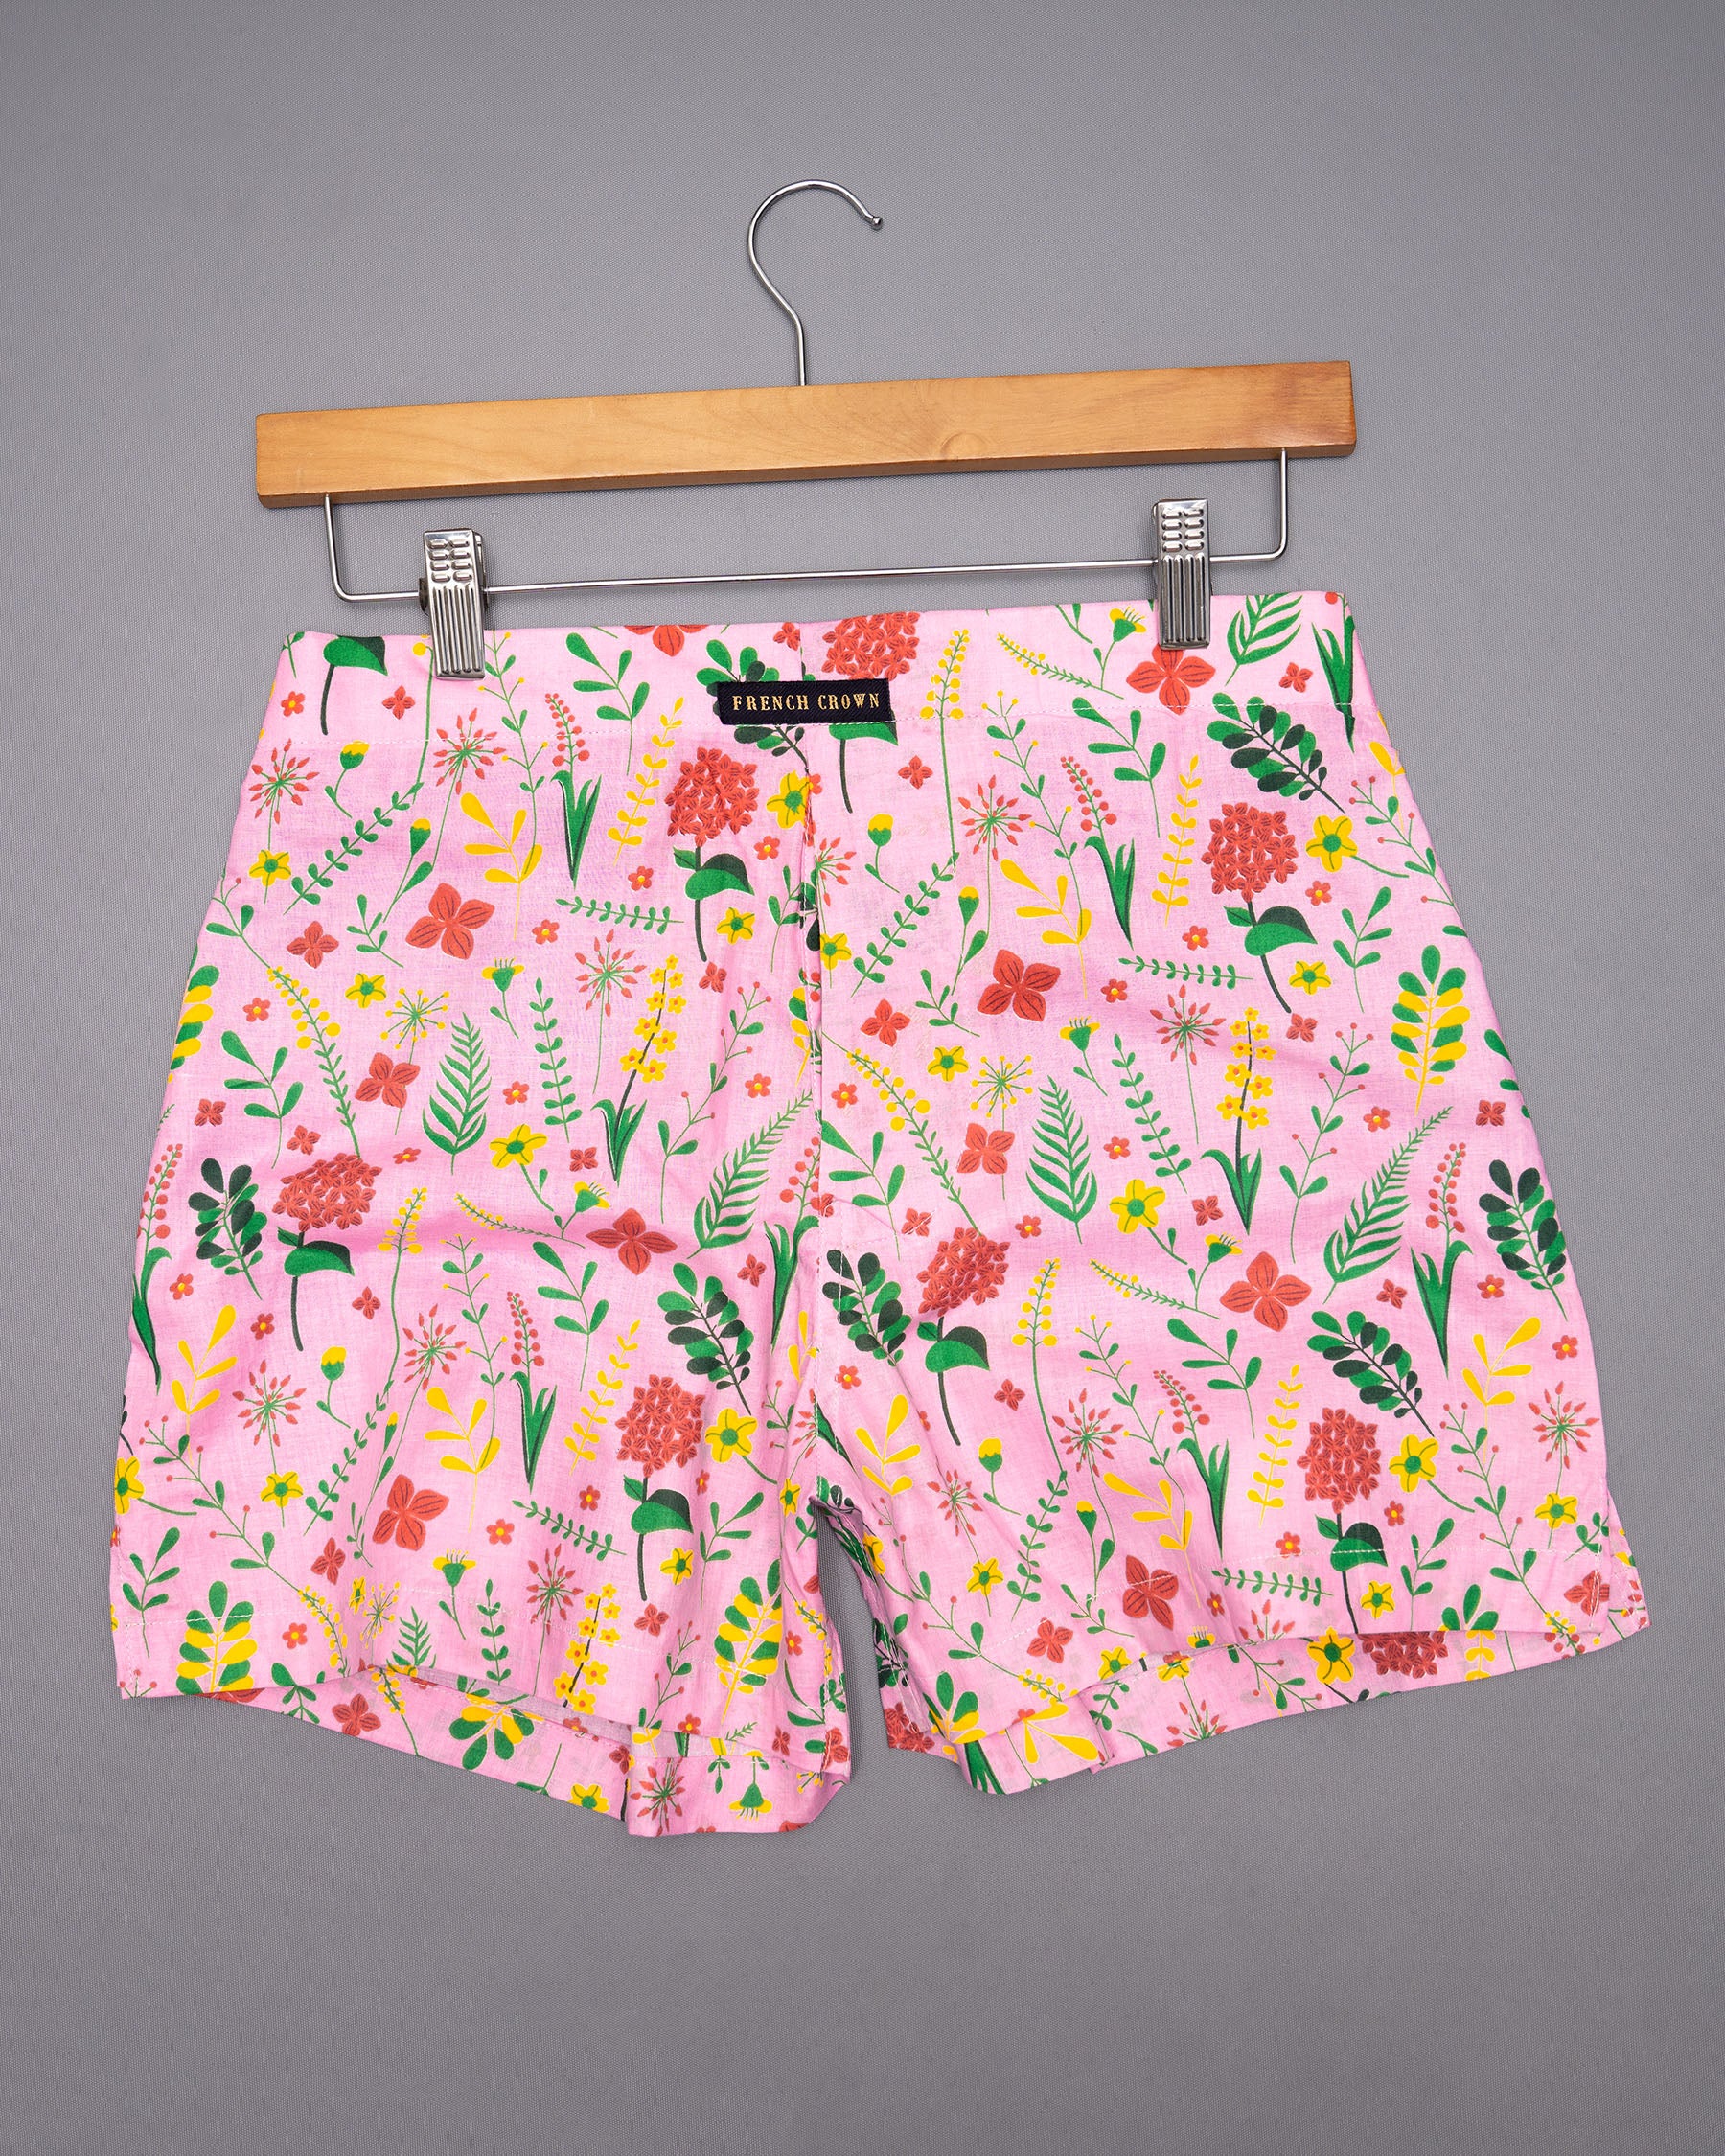 Chantilly Pink Flowery Printed Tencel Boxers BX380-01-28, BX380-01-30, BX380-01-32, BX380-01-34, BX380-01-36, BX380-01-38, BX380-01-40, BX380-01-42, BX380-01-44